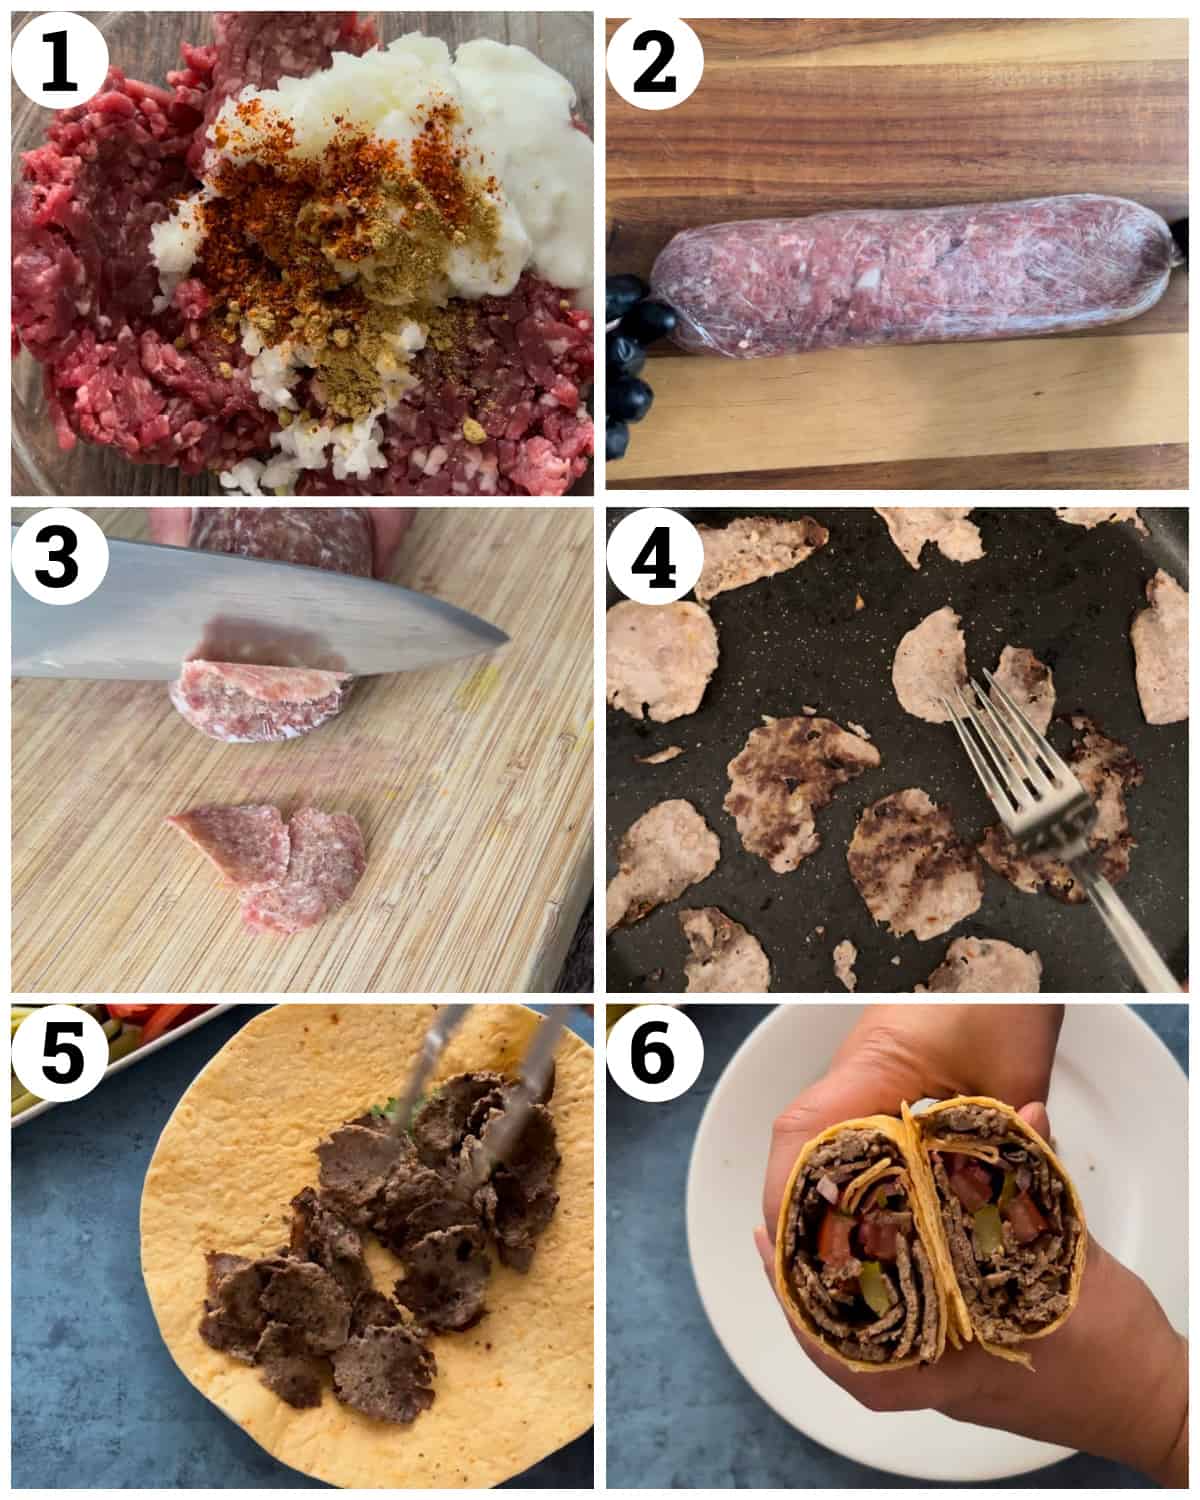 mix the meat with the onion and spices then roll and freeze. Slice, cook and make the wraps. 